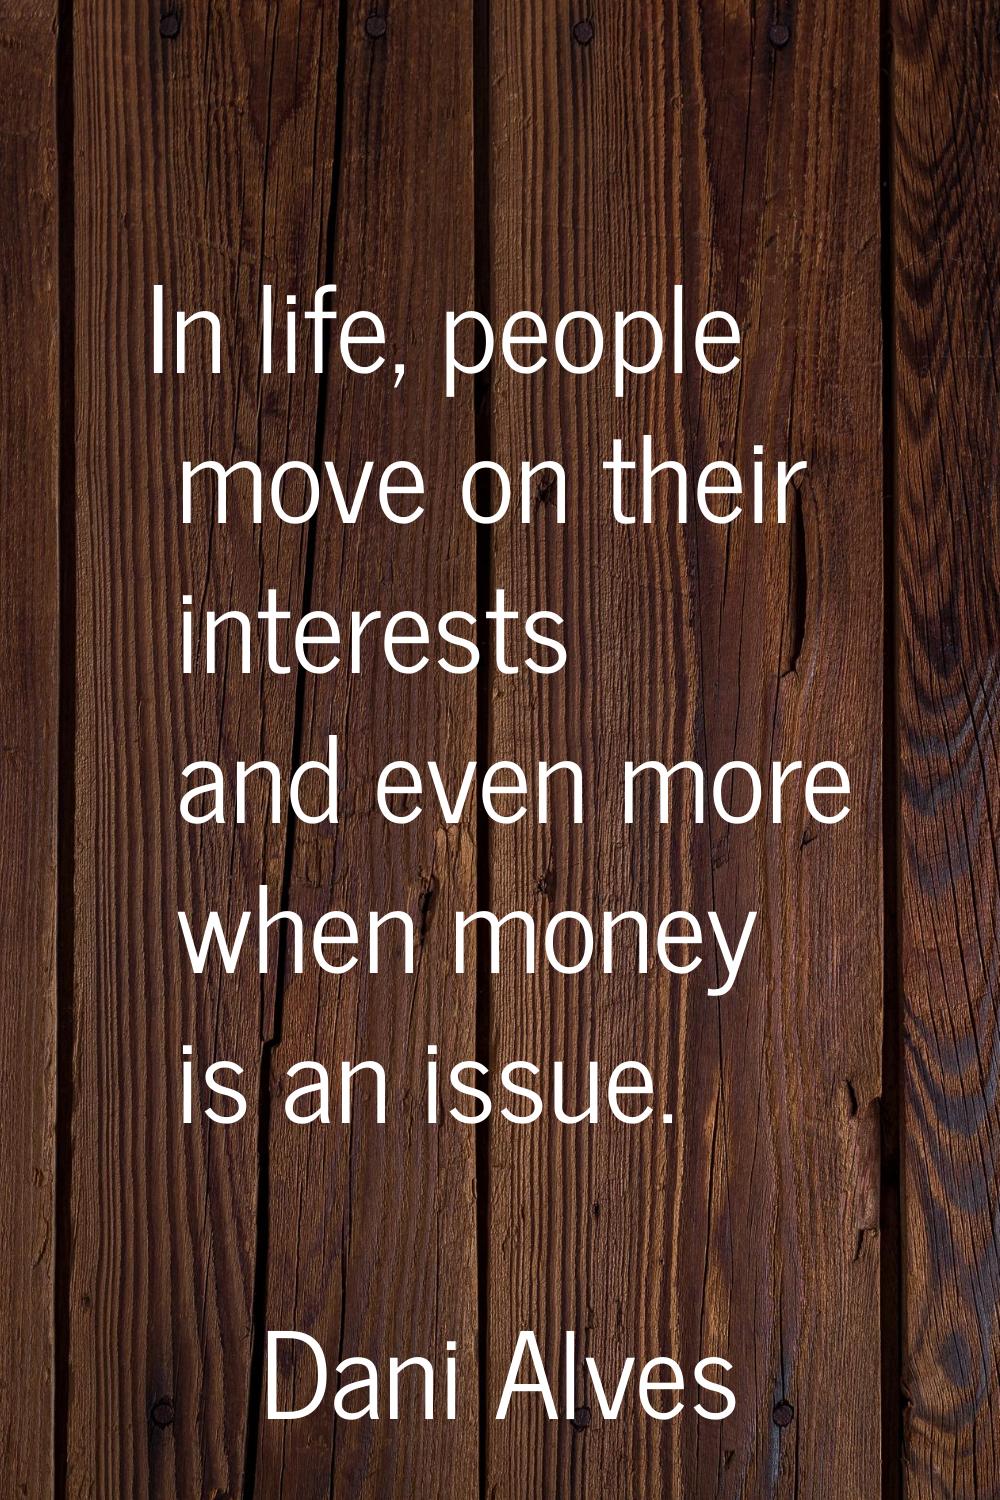 In life, people move on their interests and even more when money is an issue.